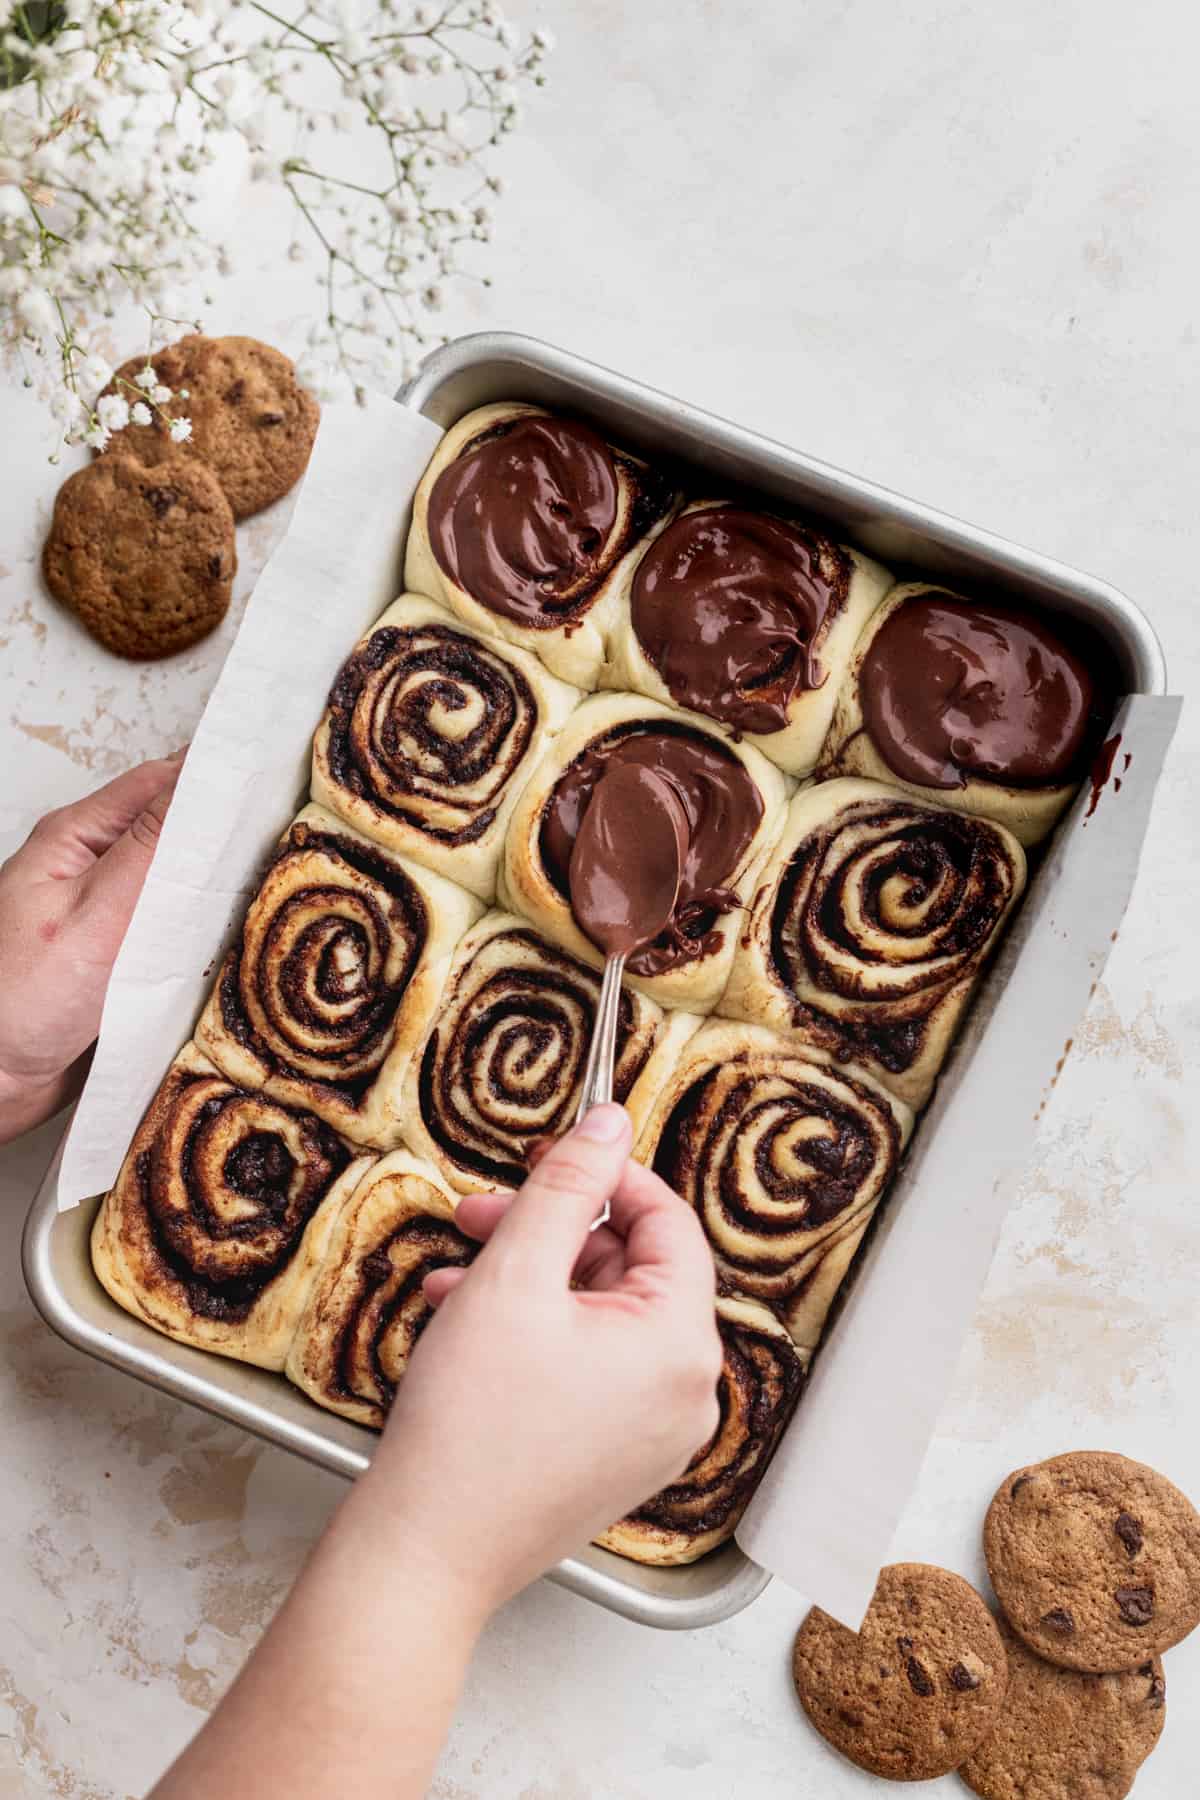 Spreading chocolate icing over the cinnamon rolls.